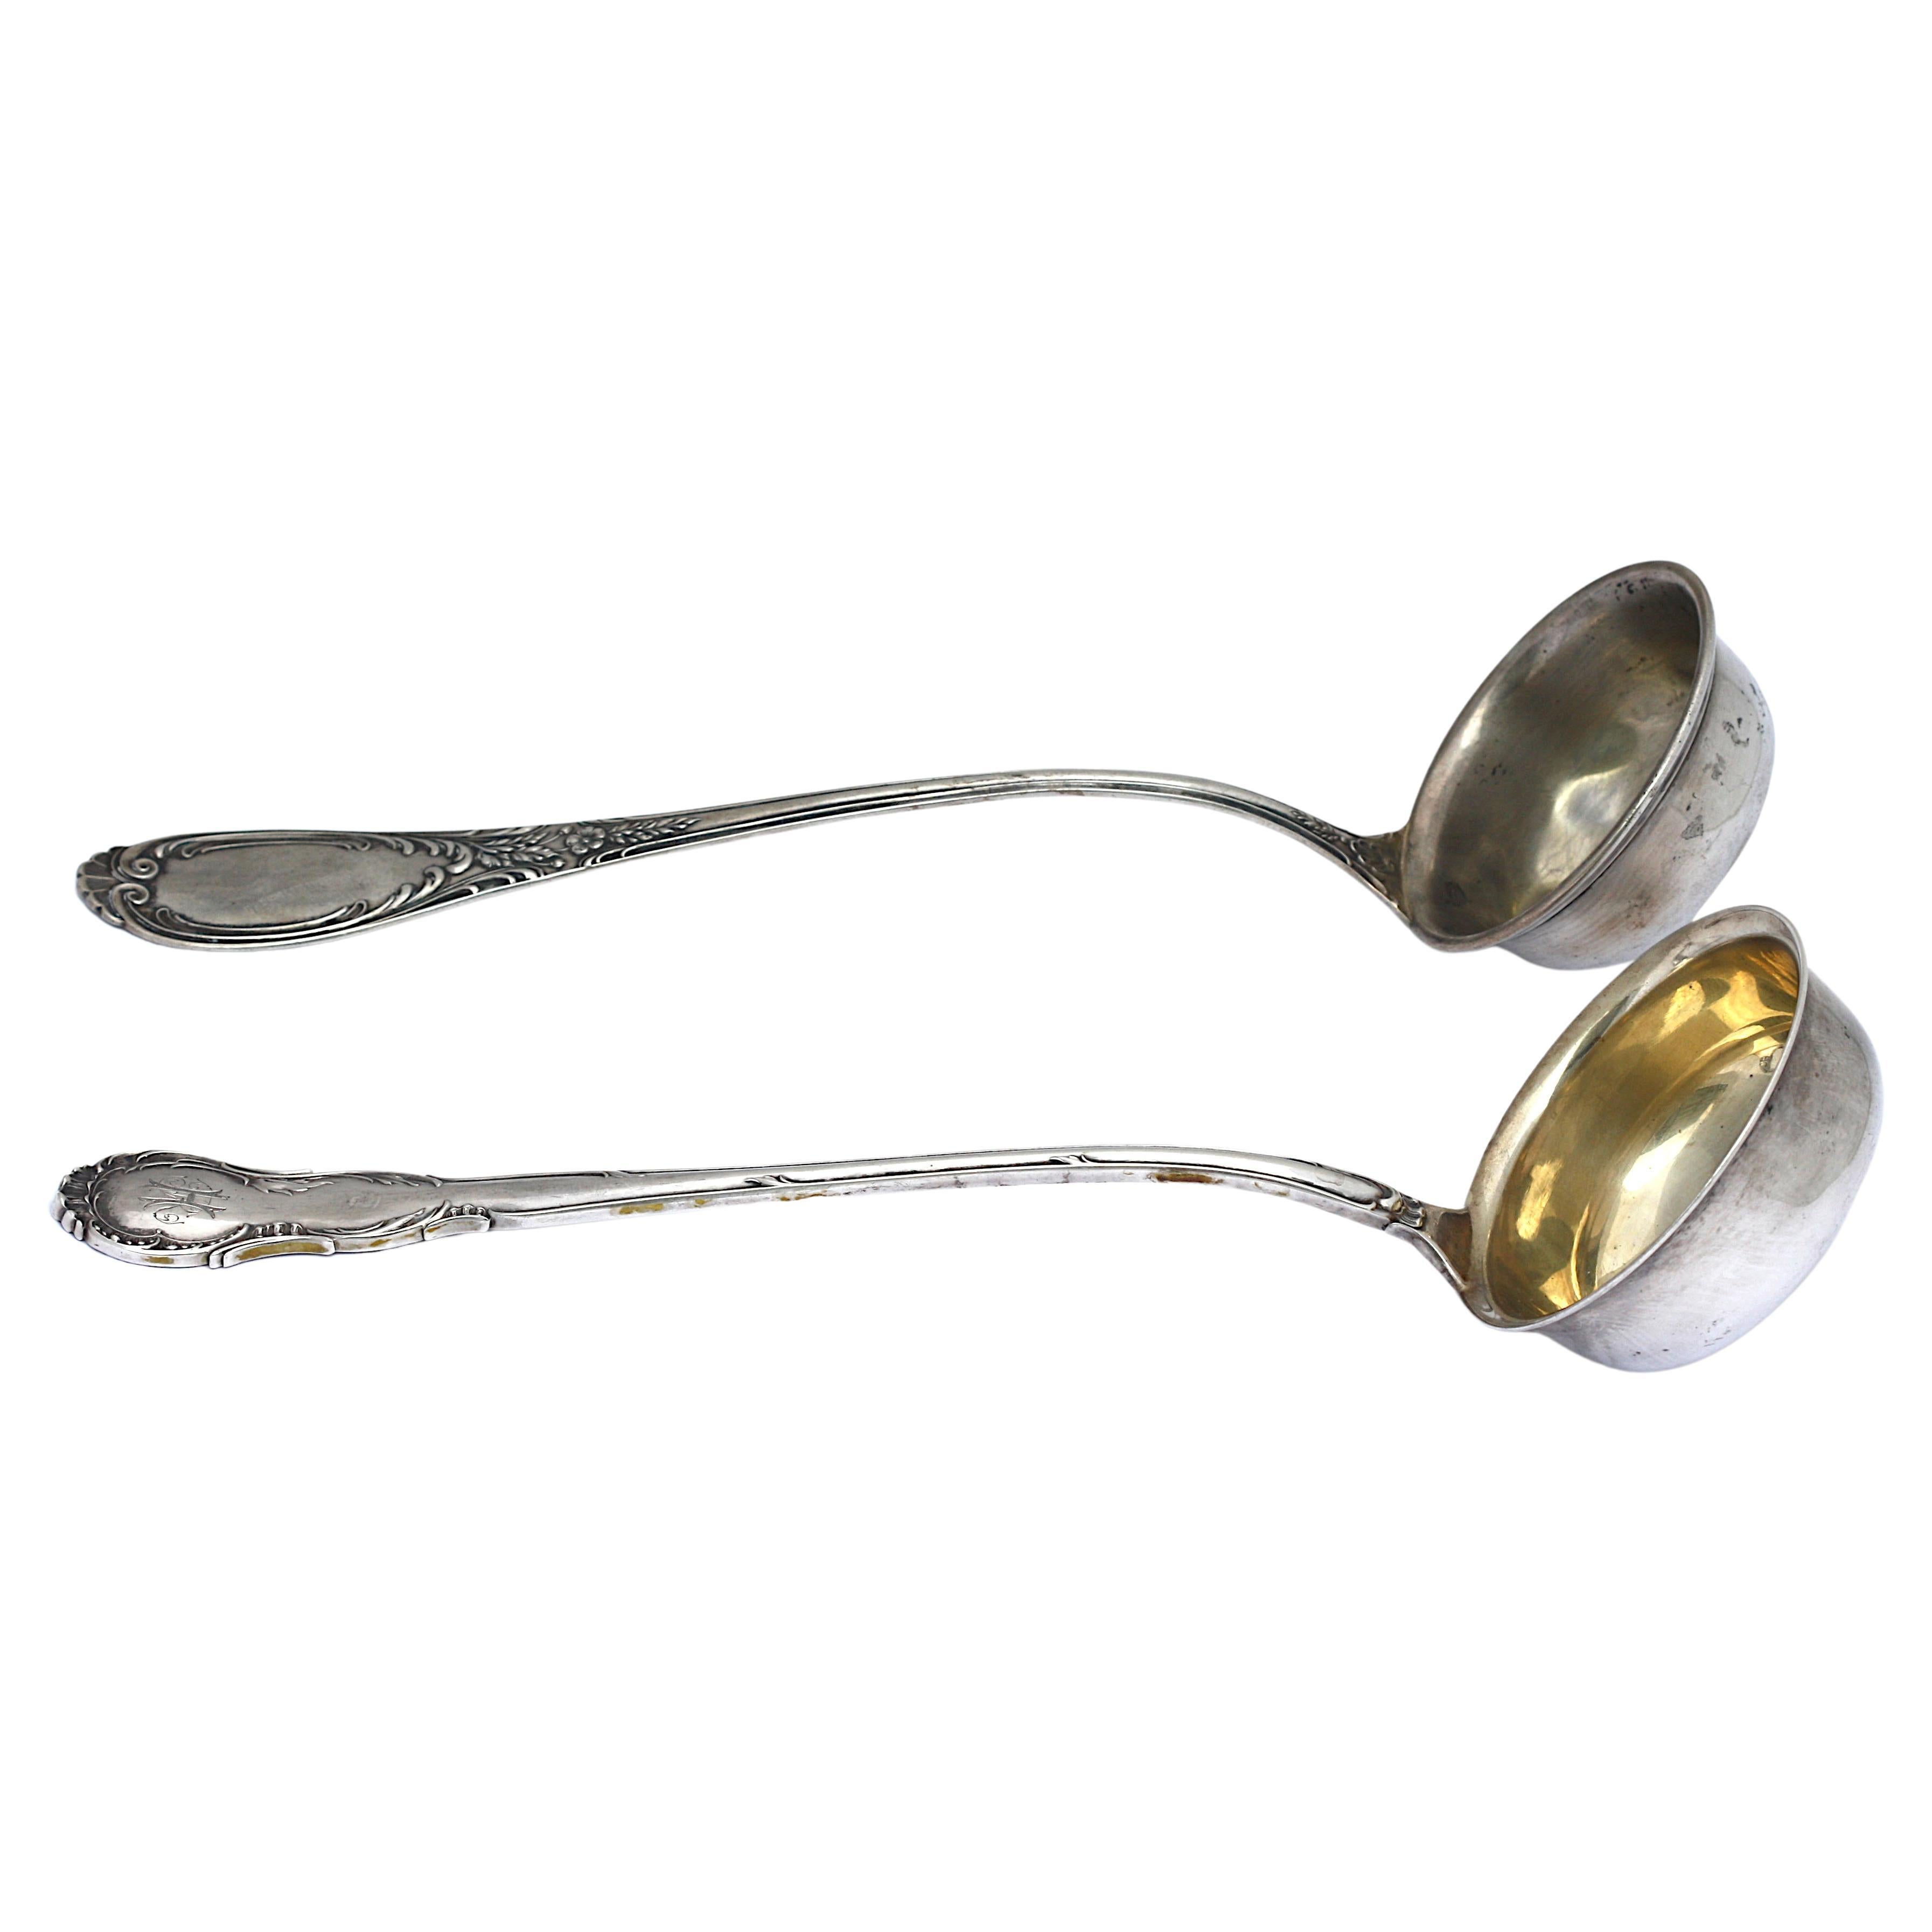 Two Similar Continental Silver Soup Ladles